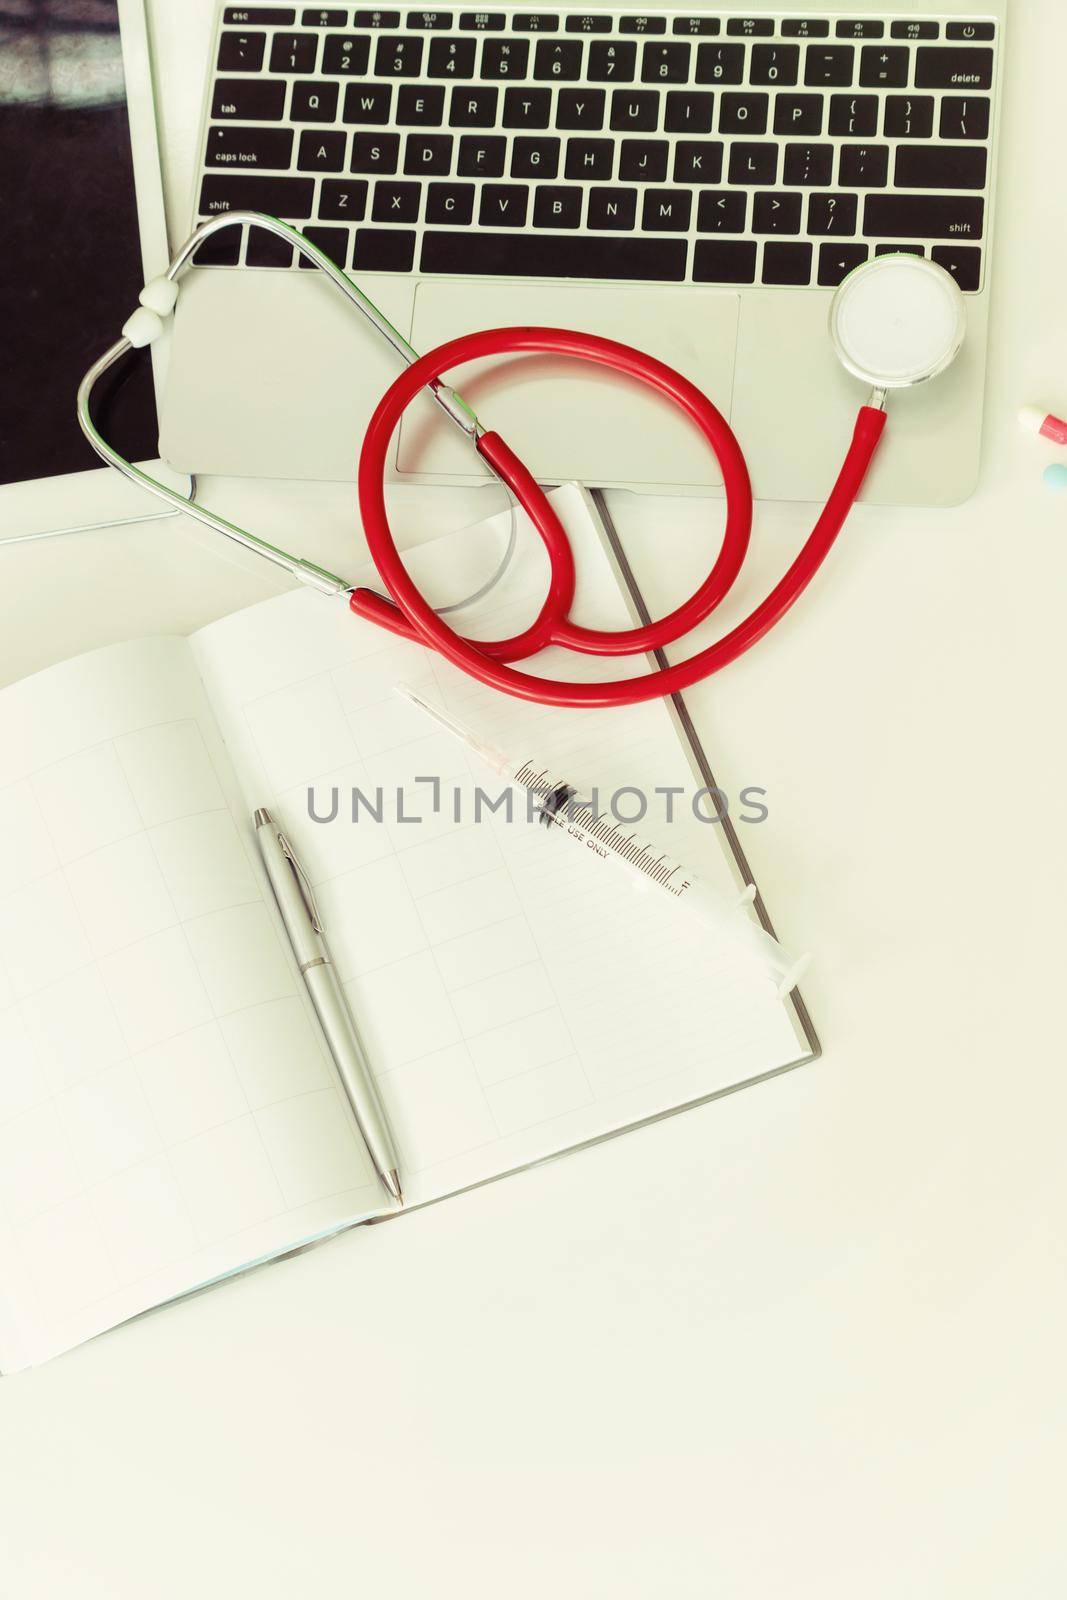 Medical healthcare backgrounds flat lay objects with copy space. Doctor stethoscope, medicine, laptop computer and notebook on white office table.